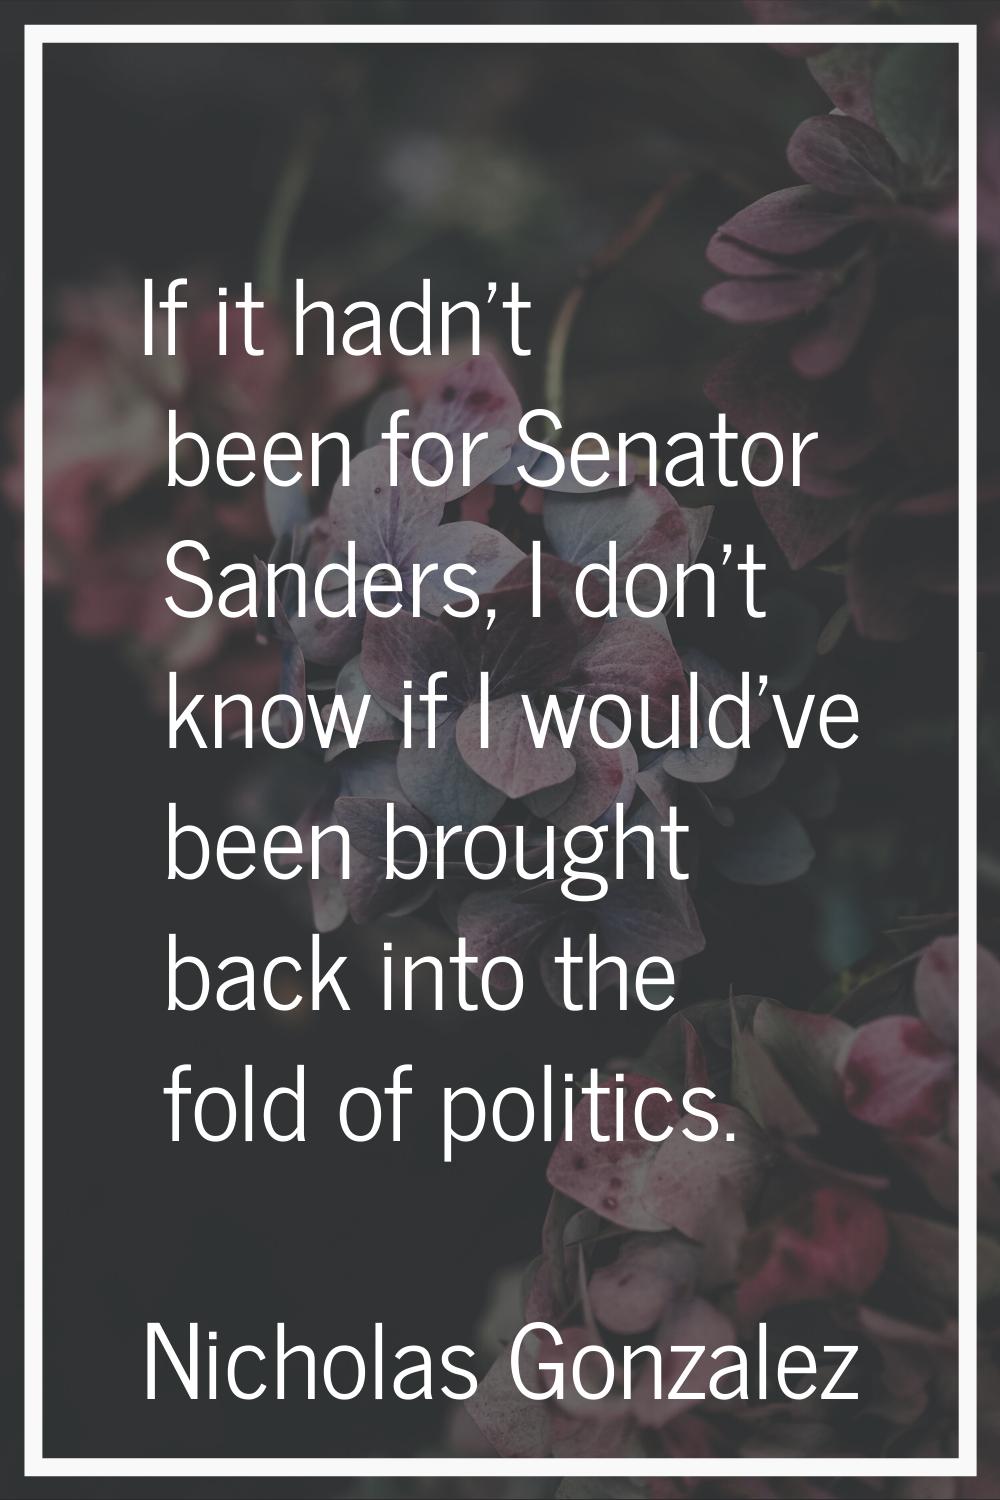 If it hadn't been for Senator Sanders, I don't know if I would've been brought back into the fold o